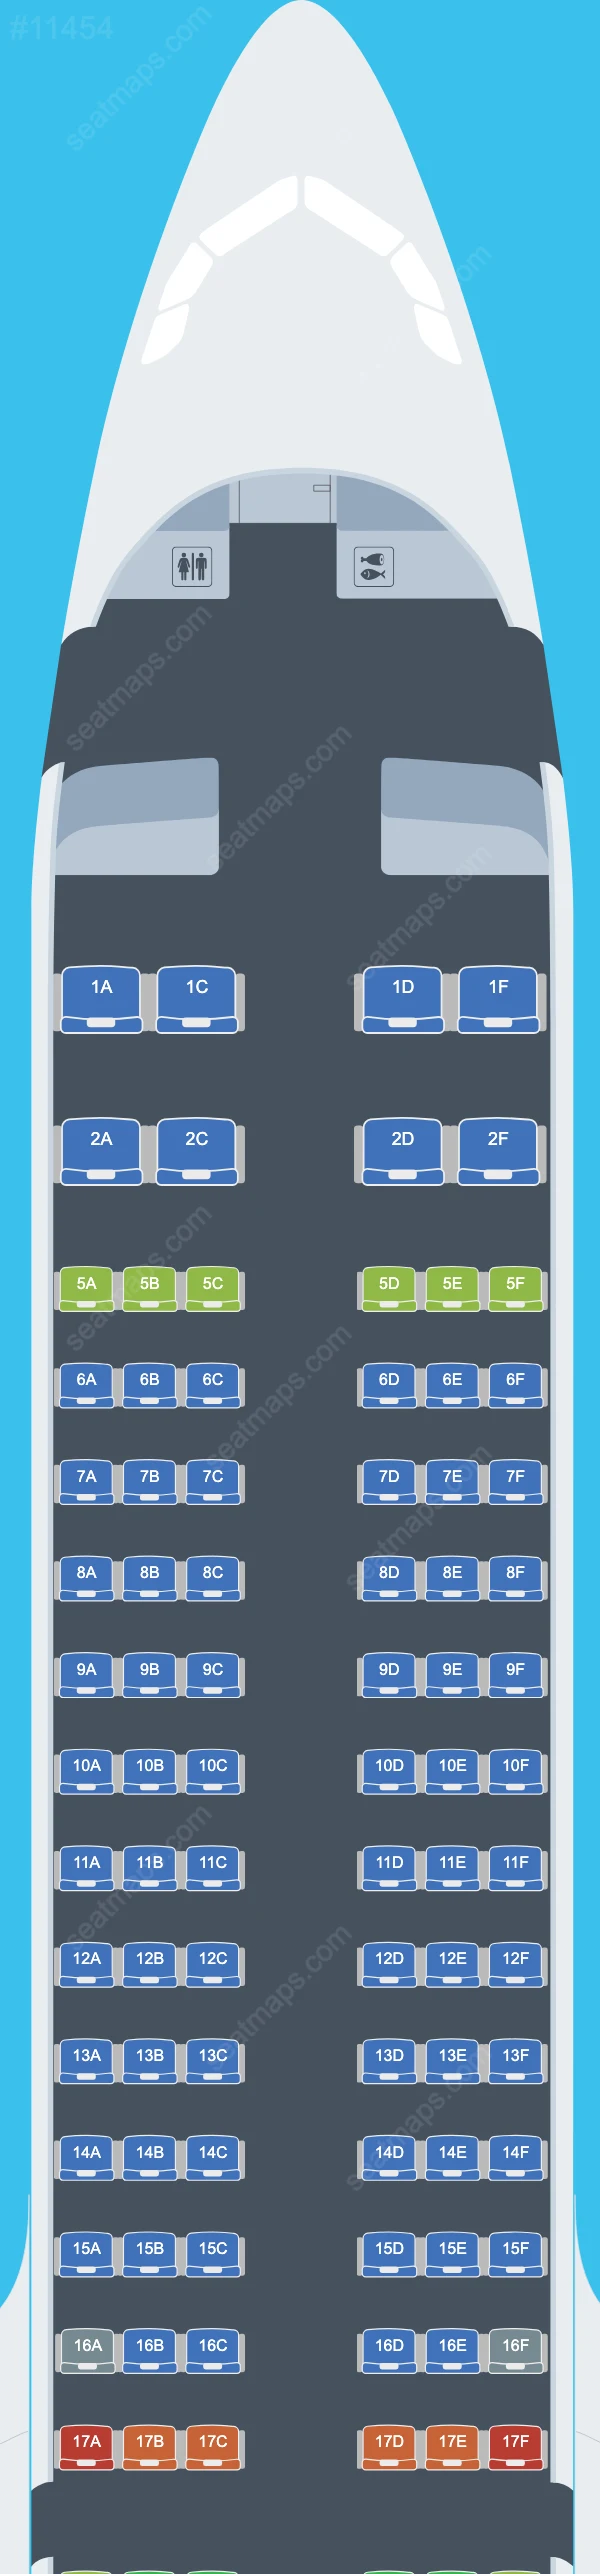 HiSky Europe Airbus A321neo aircraft seat map  A321neo